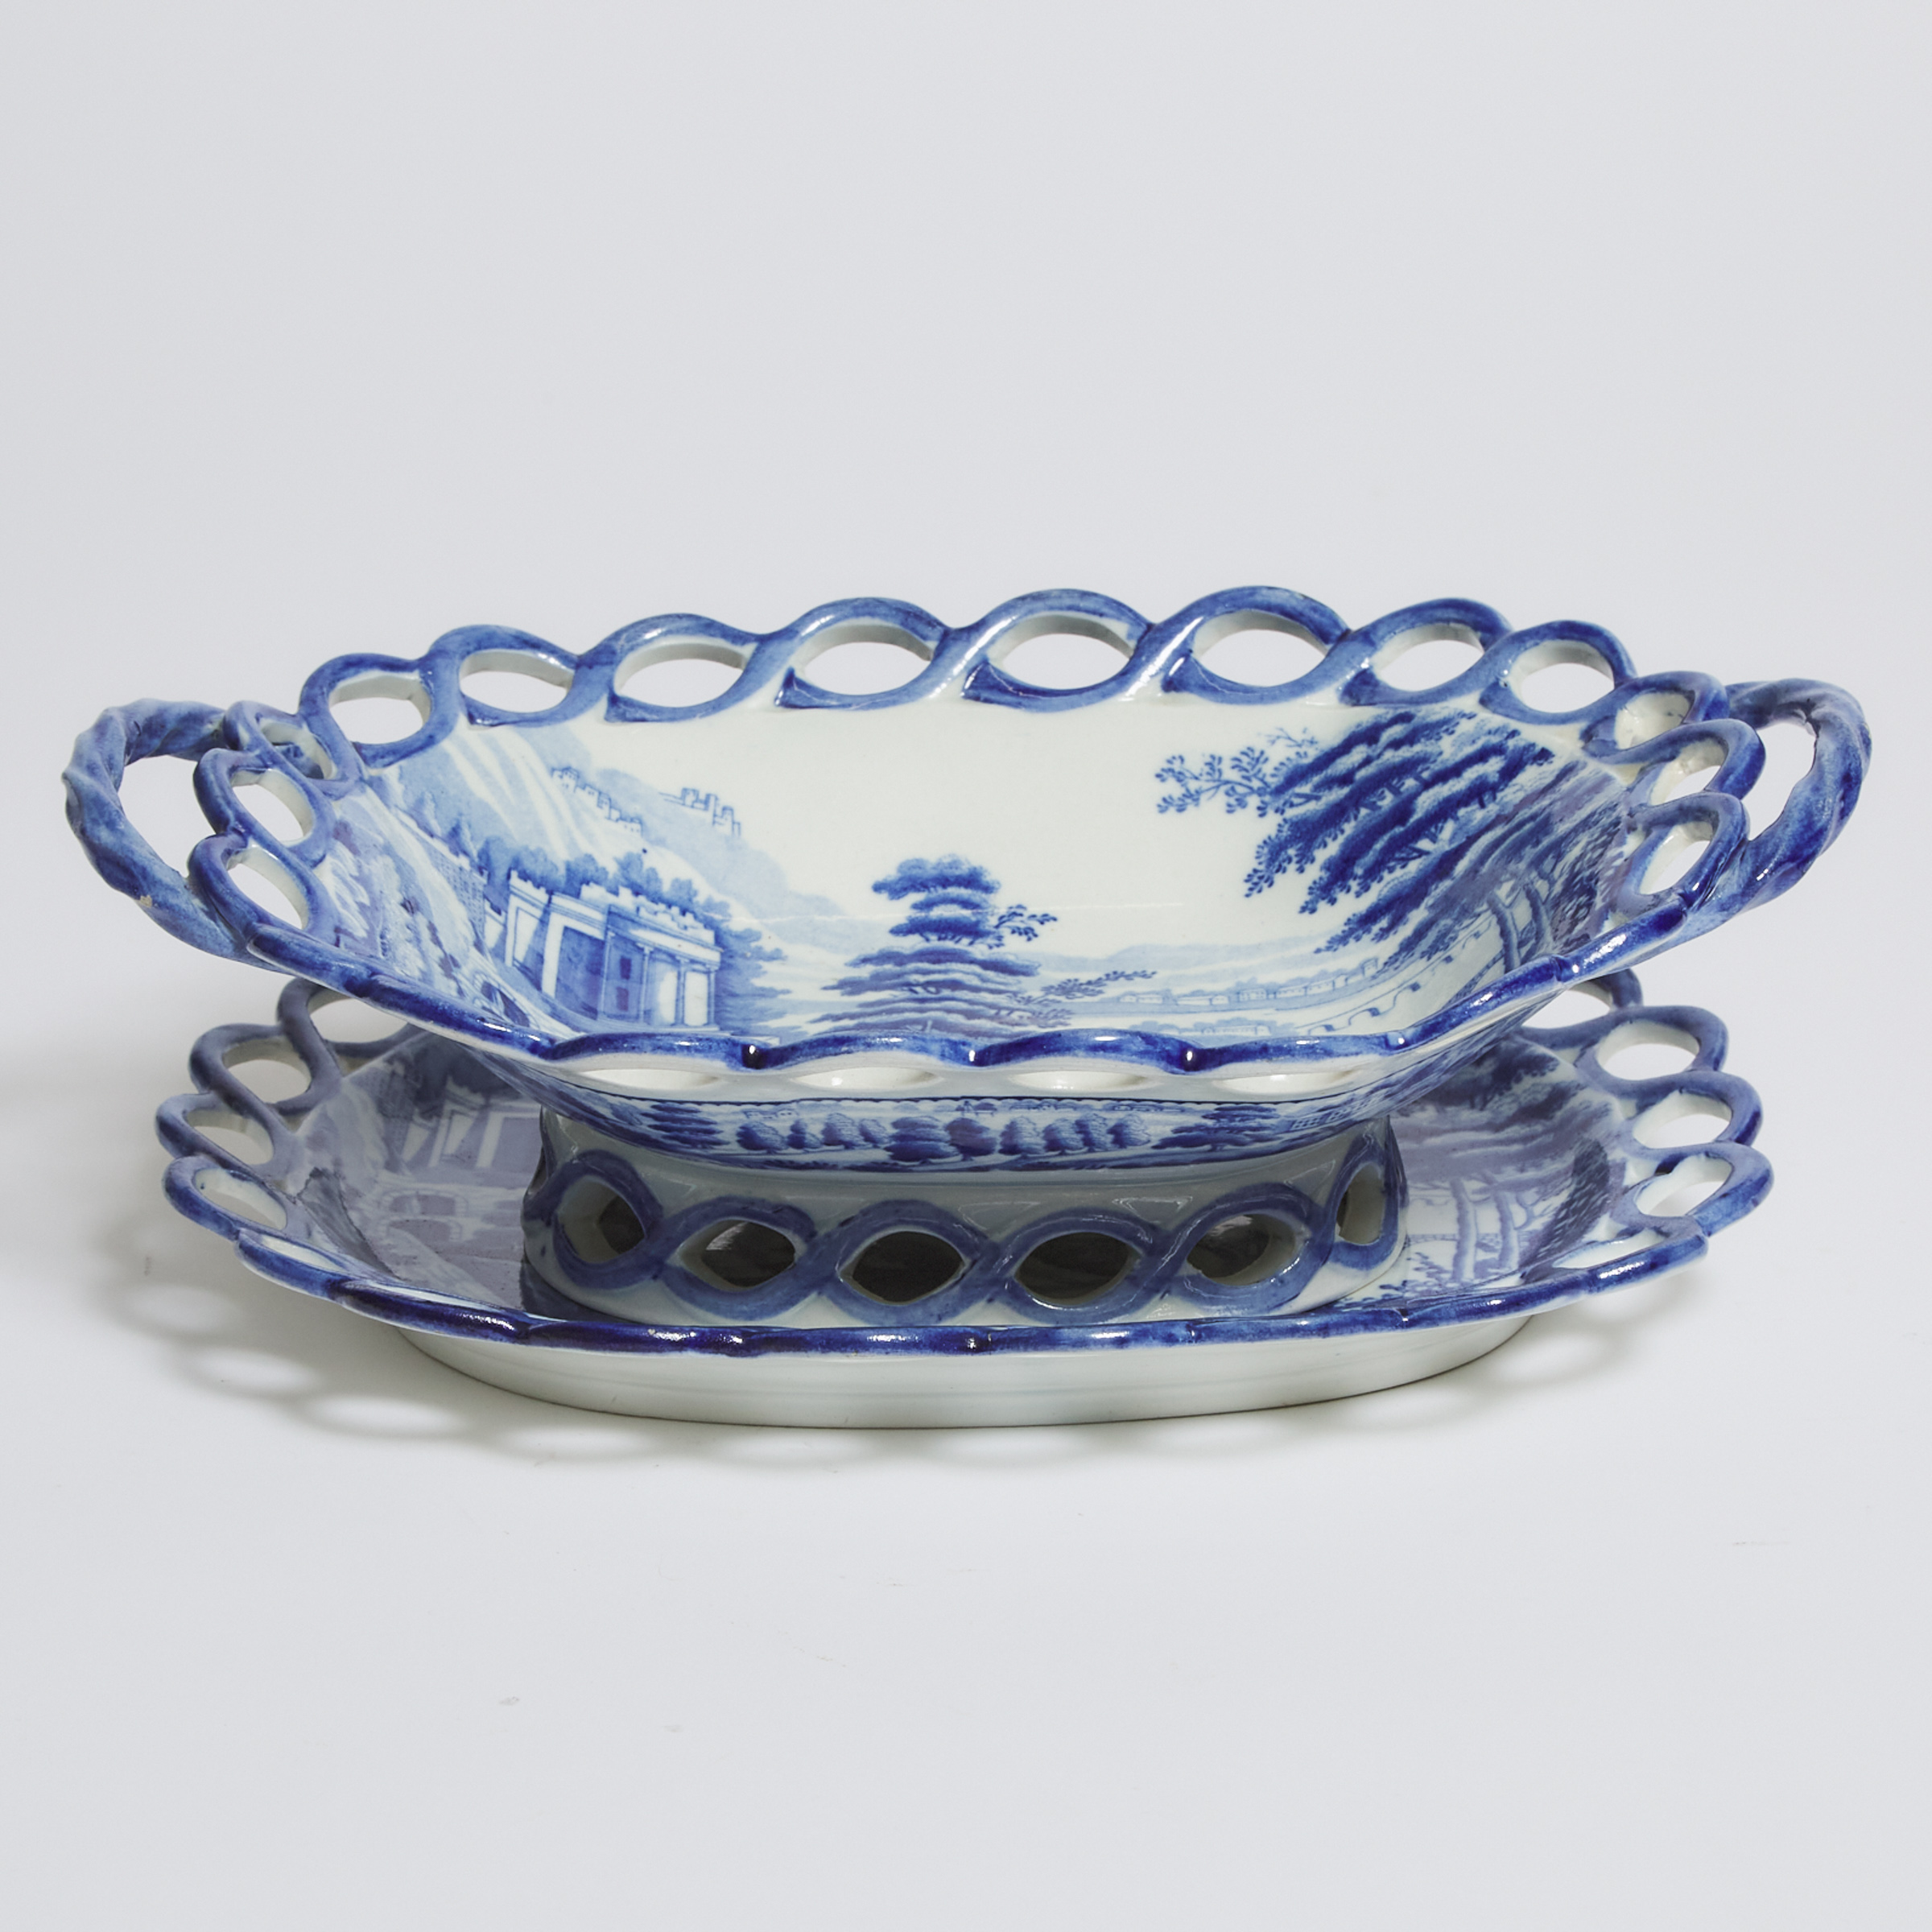 Riley 'Scene After Claude Lorraine' Blue Printed Oval Basked and Stand, c.1820